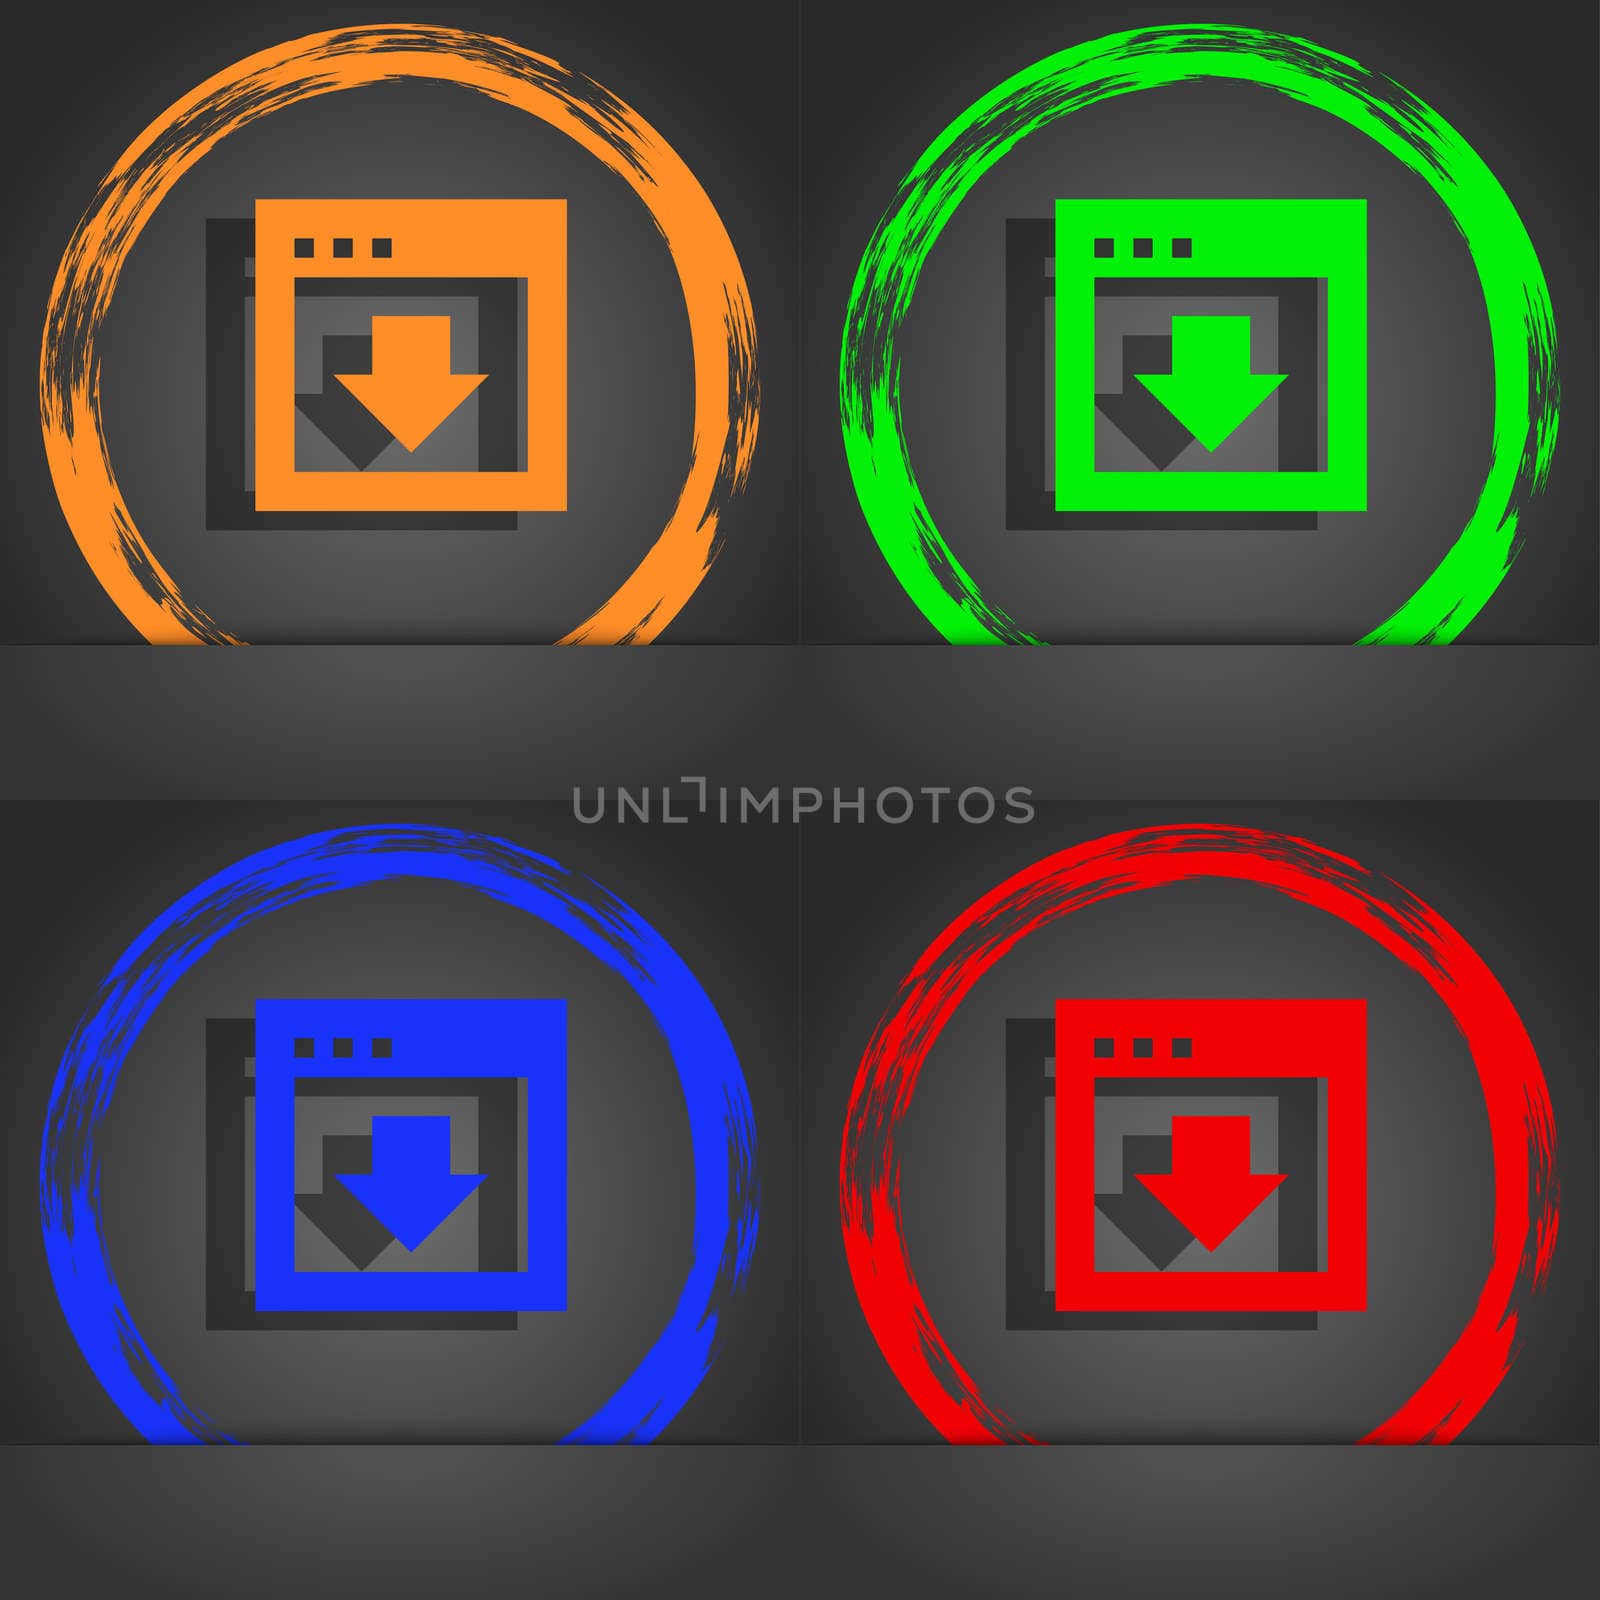 Arrow down, Download, Load, Backup icon symbol. Fashionable modern style. In the orange, green, blue, green design. illustration